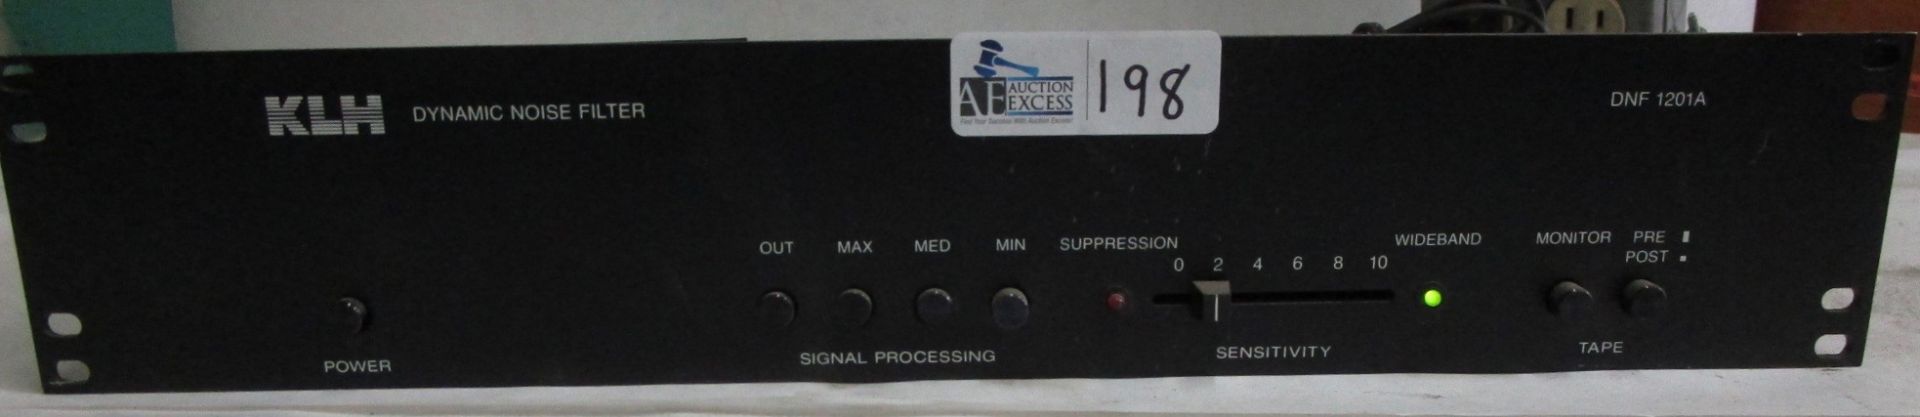 KLH DNF-1201A DYNAMIC NOISE FILTER